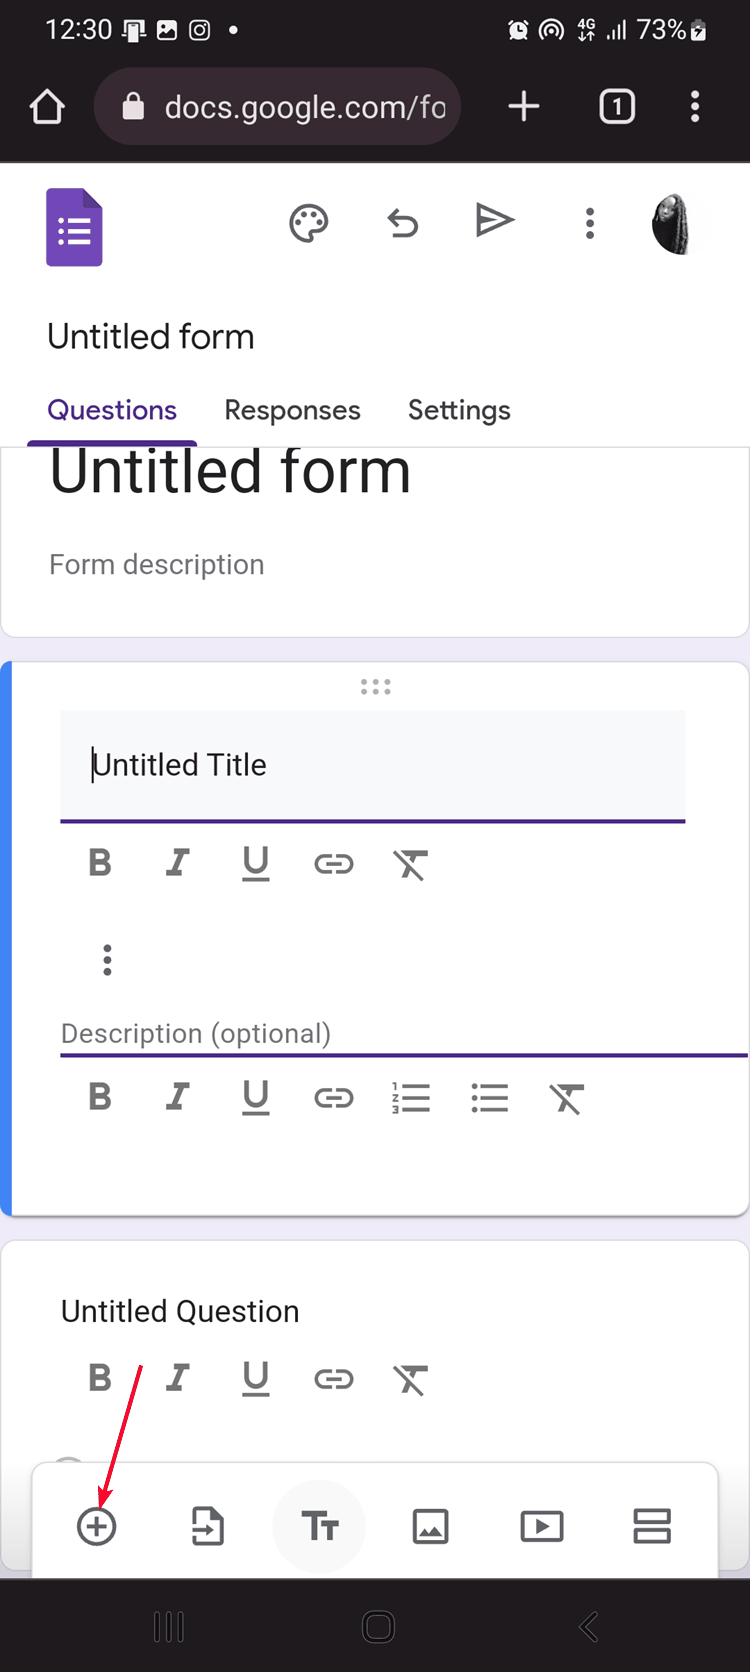 Icon for adding new questions on mobile version of Google Forms